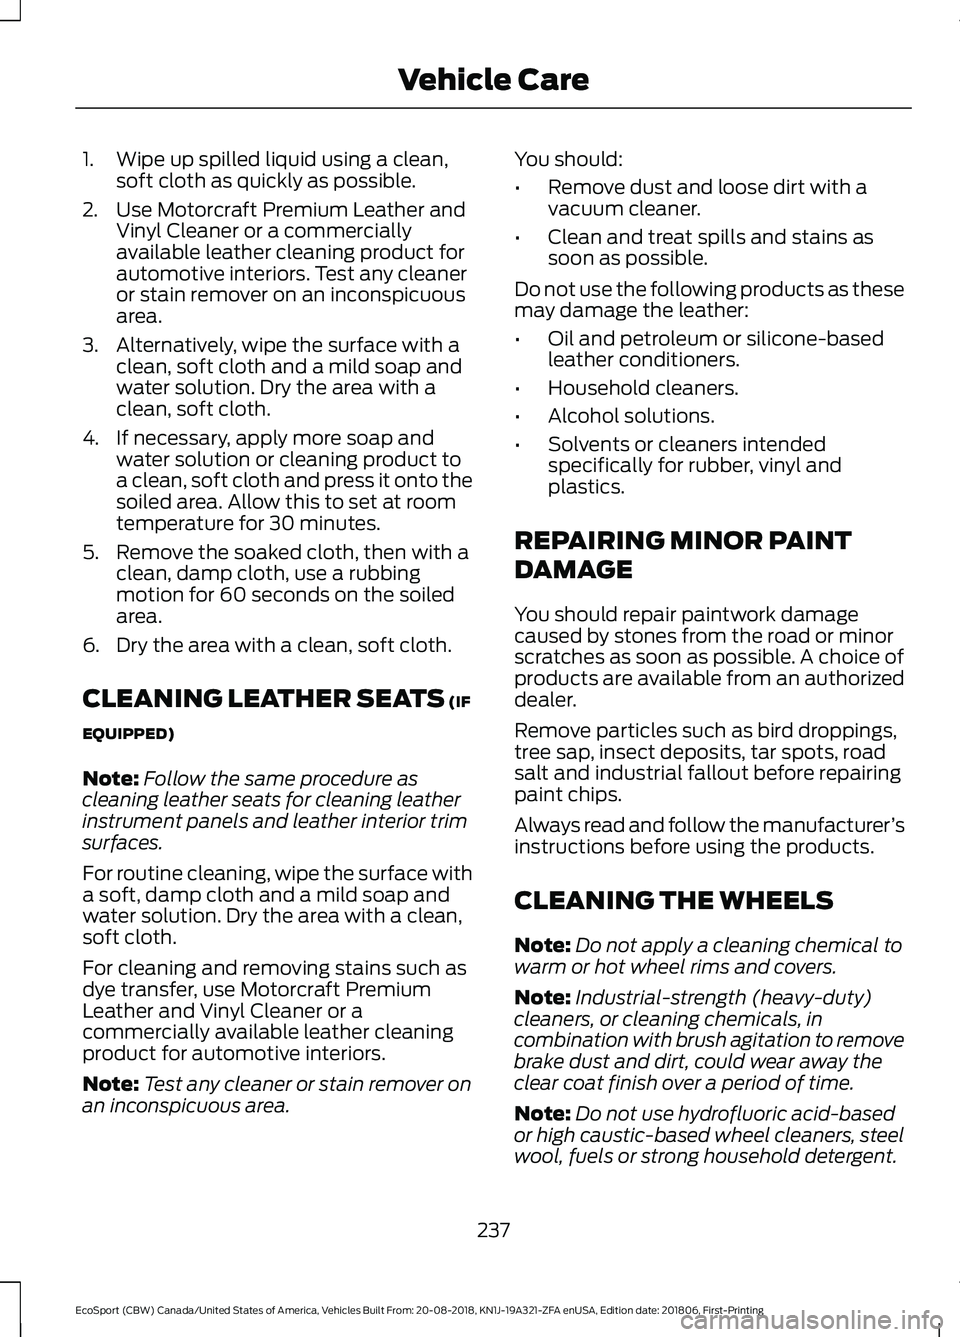 FORD ECOSPORT 2019  Owners Manual 1.Wipe up spilled liquid using a clean,soft cloth as quickly as possible.
2.Use Motorcraft Premium Leather andVinyl Cleaner or a commerciallyavailable leather cleaning product forautomotive interiors.